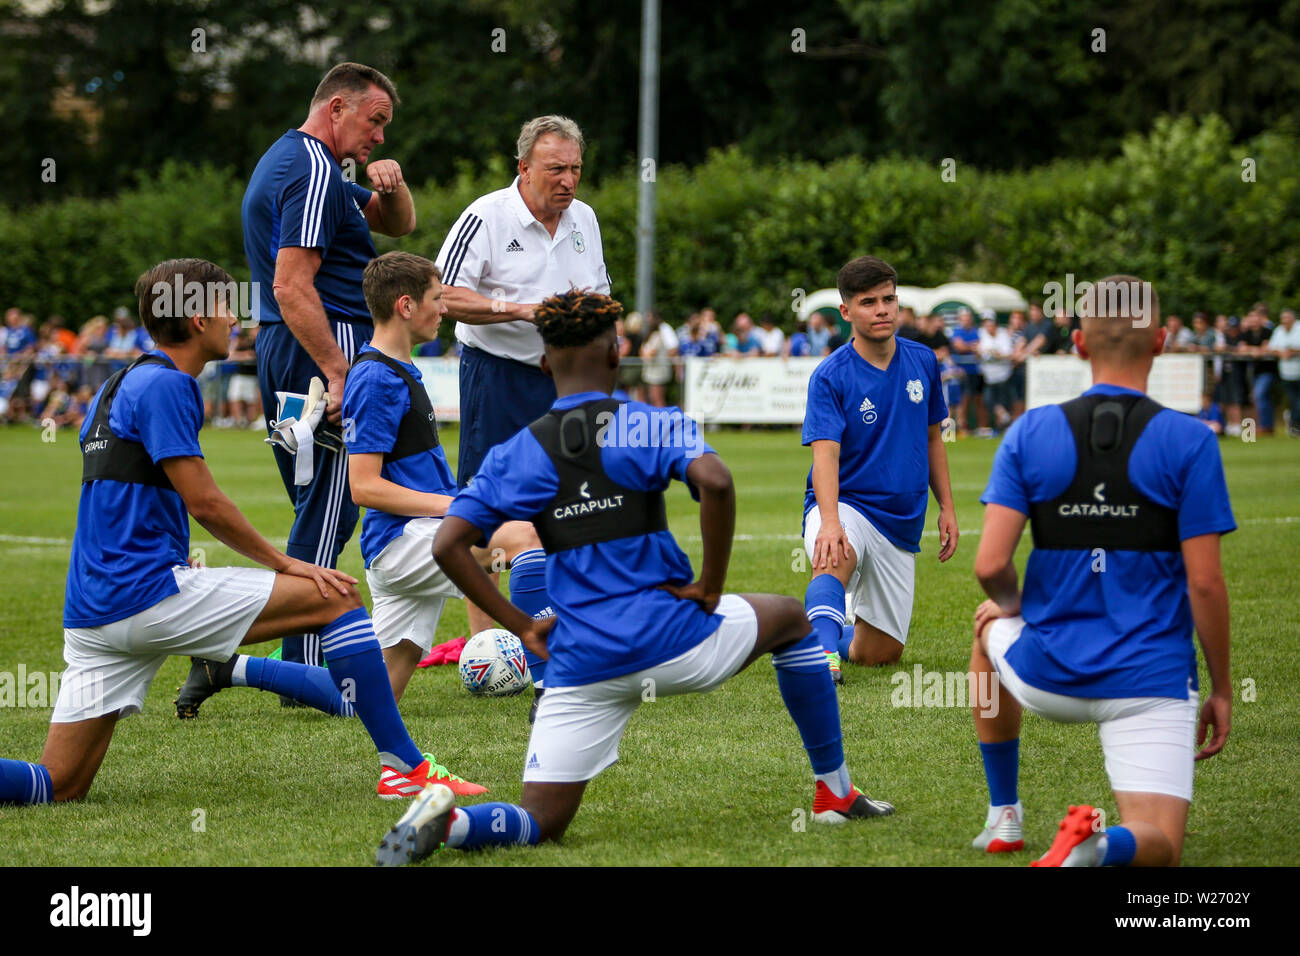 CARDIFF, UNITED KINGDOM. 5th July 2019. Manager Neil Warnock of Cardiff City FC addressing his squad in the warm up before the pre-season friendly match at Rhiw'r Ddar. © Photo Matthew Lofthouse - Freelance Photographer Stock Photo